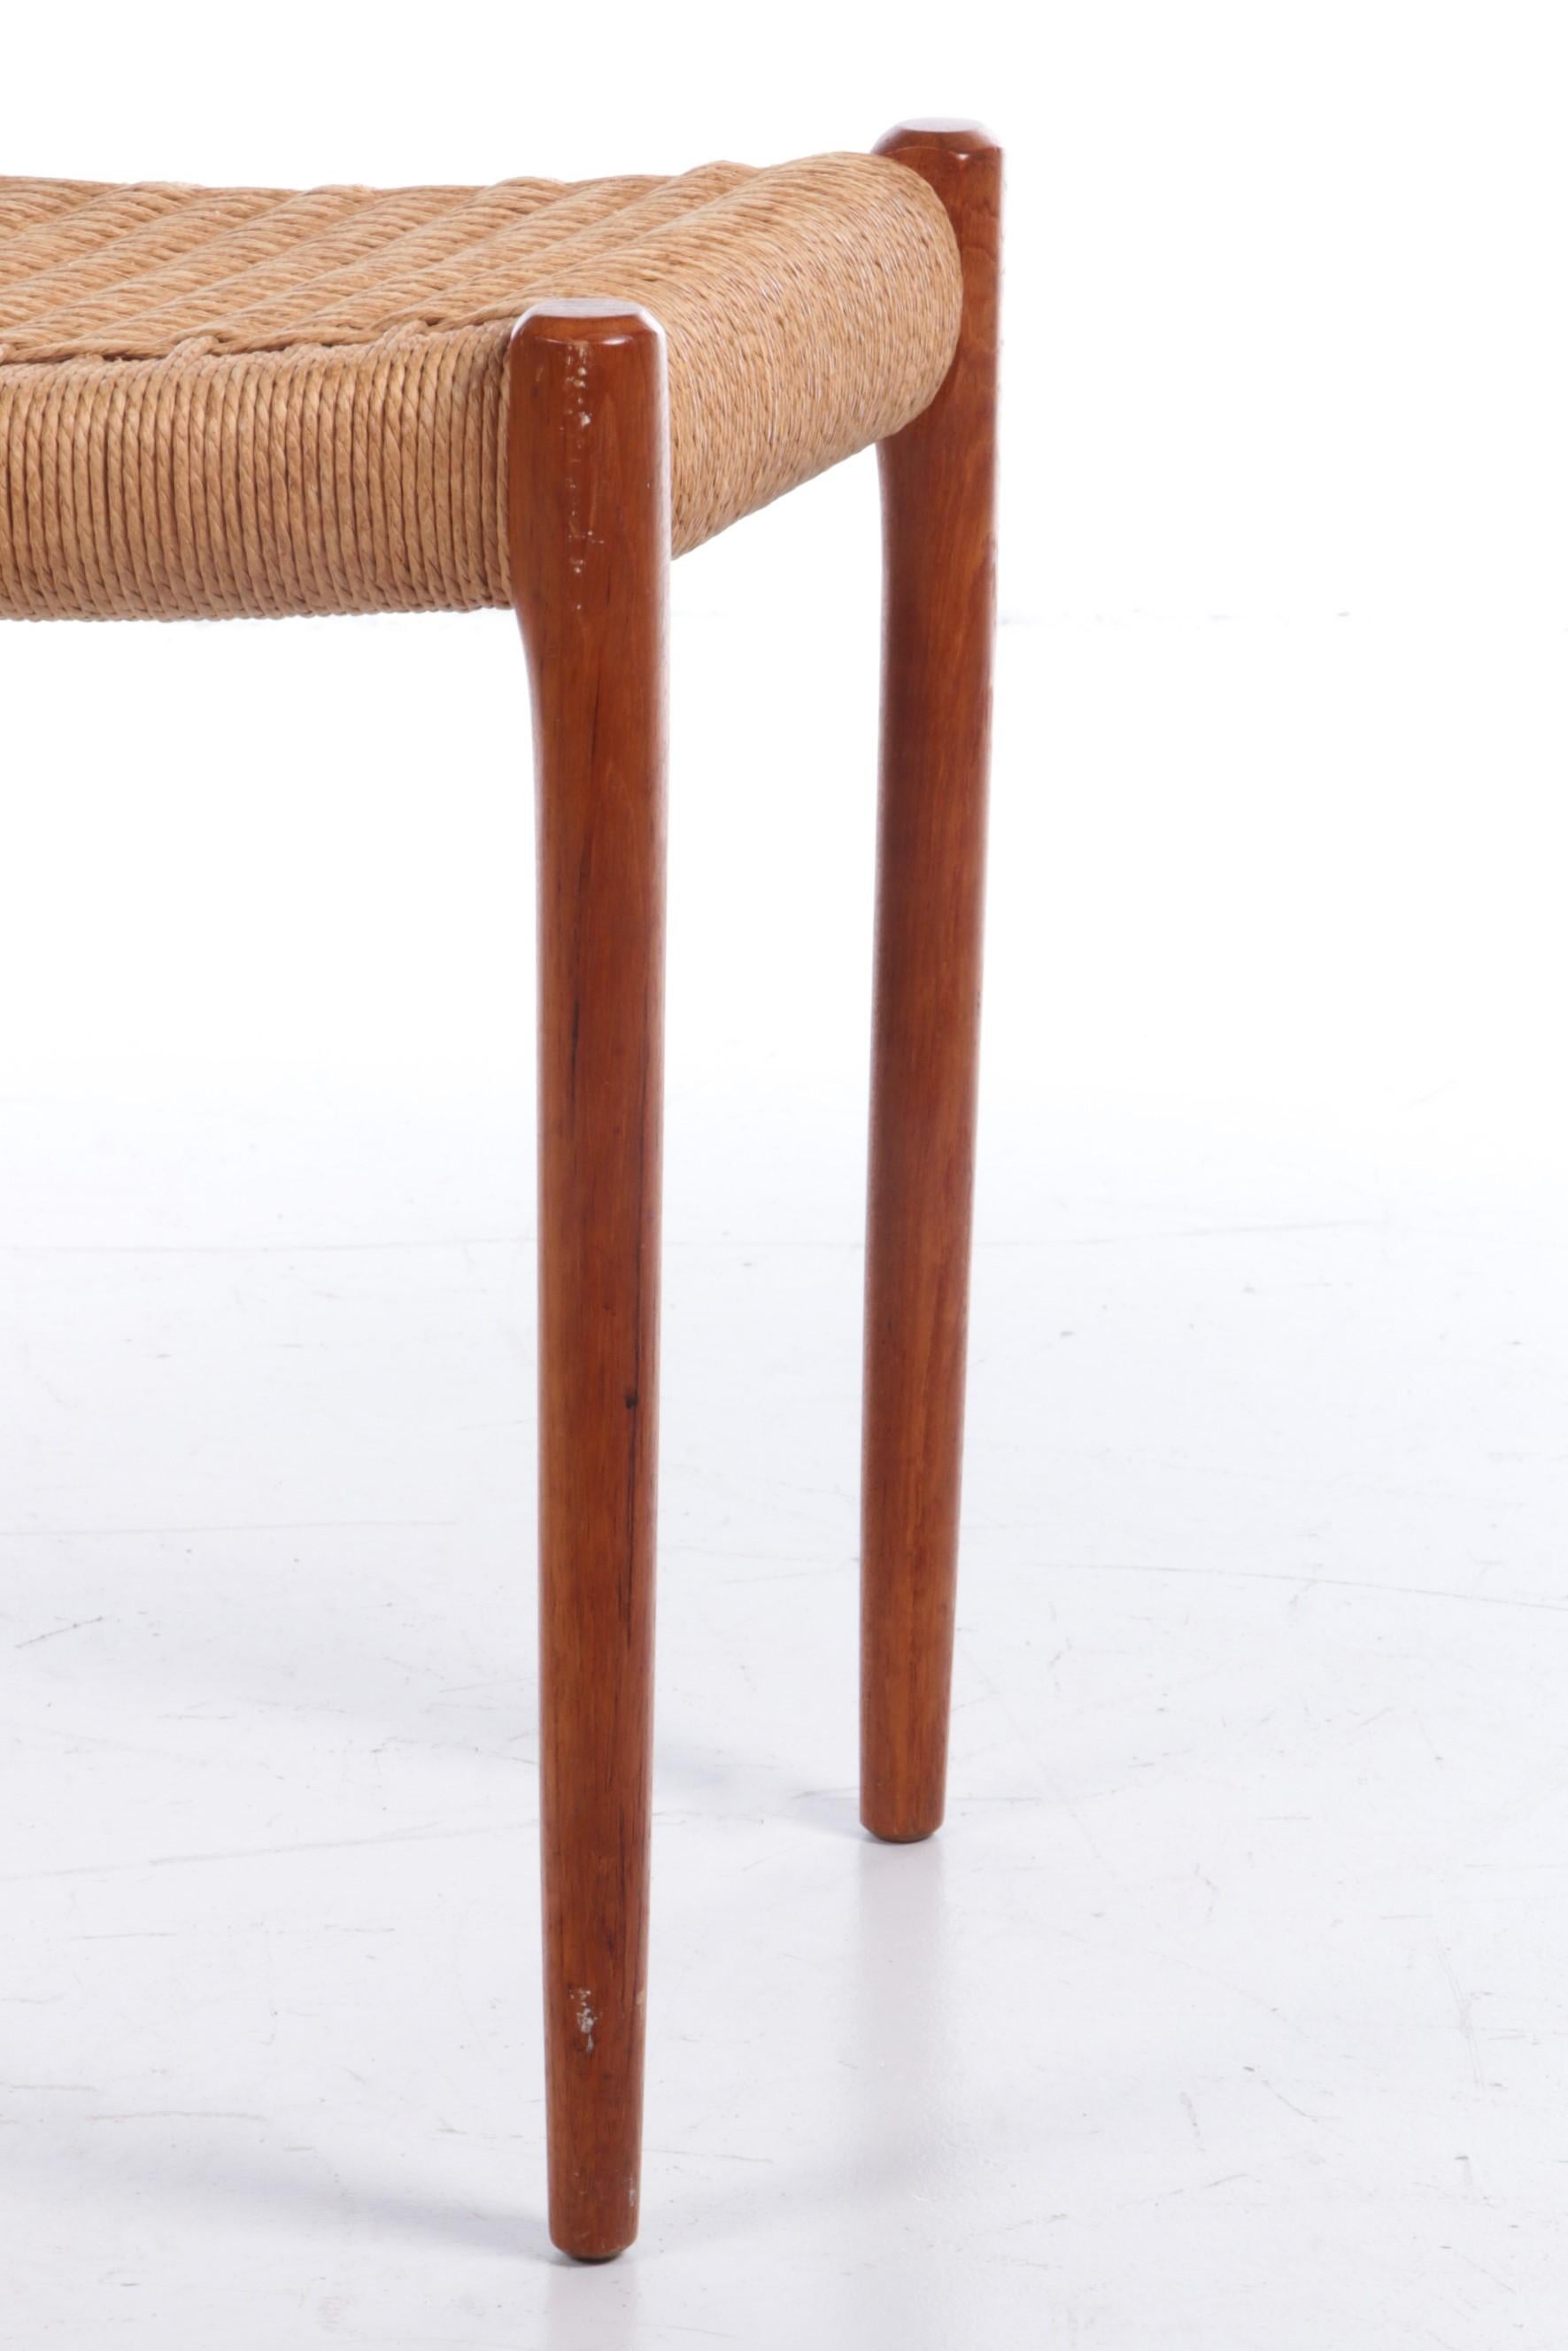 Niels Otto Møller Model 80a Teak Wood with Papercord, Denmark, 1960 2